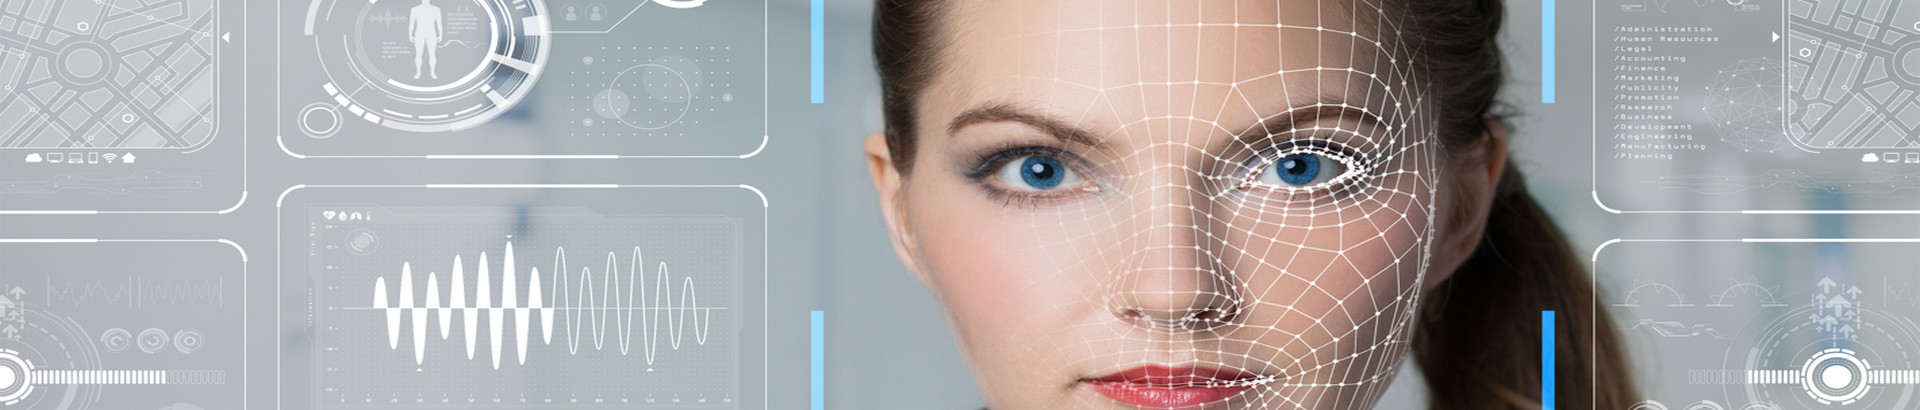 Face Recognition Technology Has Improved in Digital Age